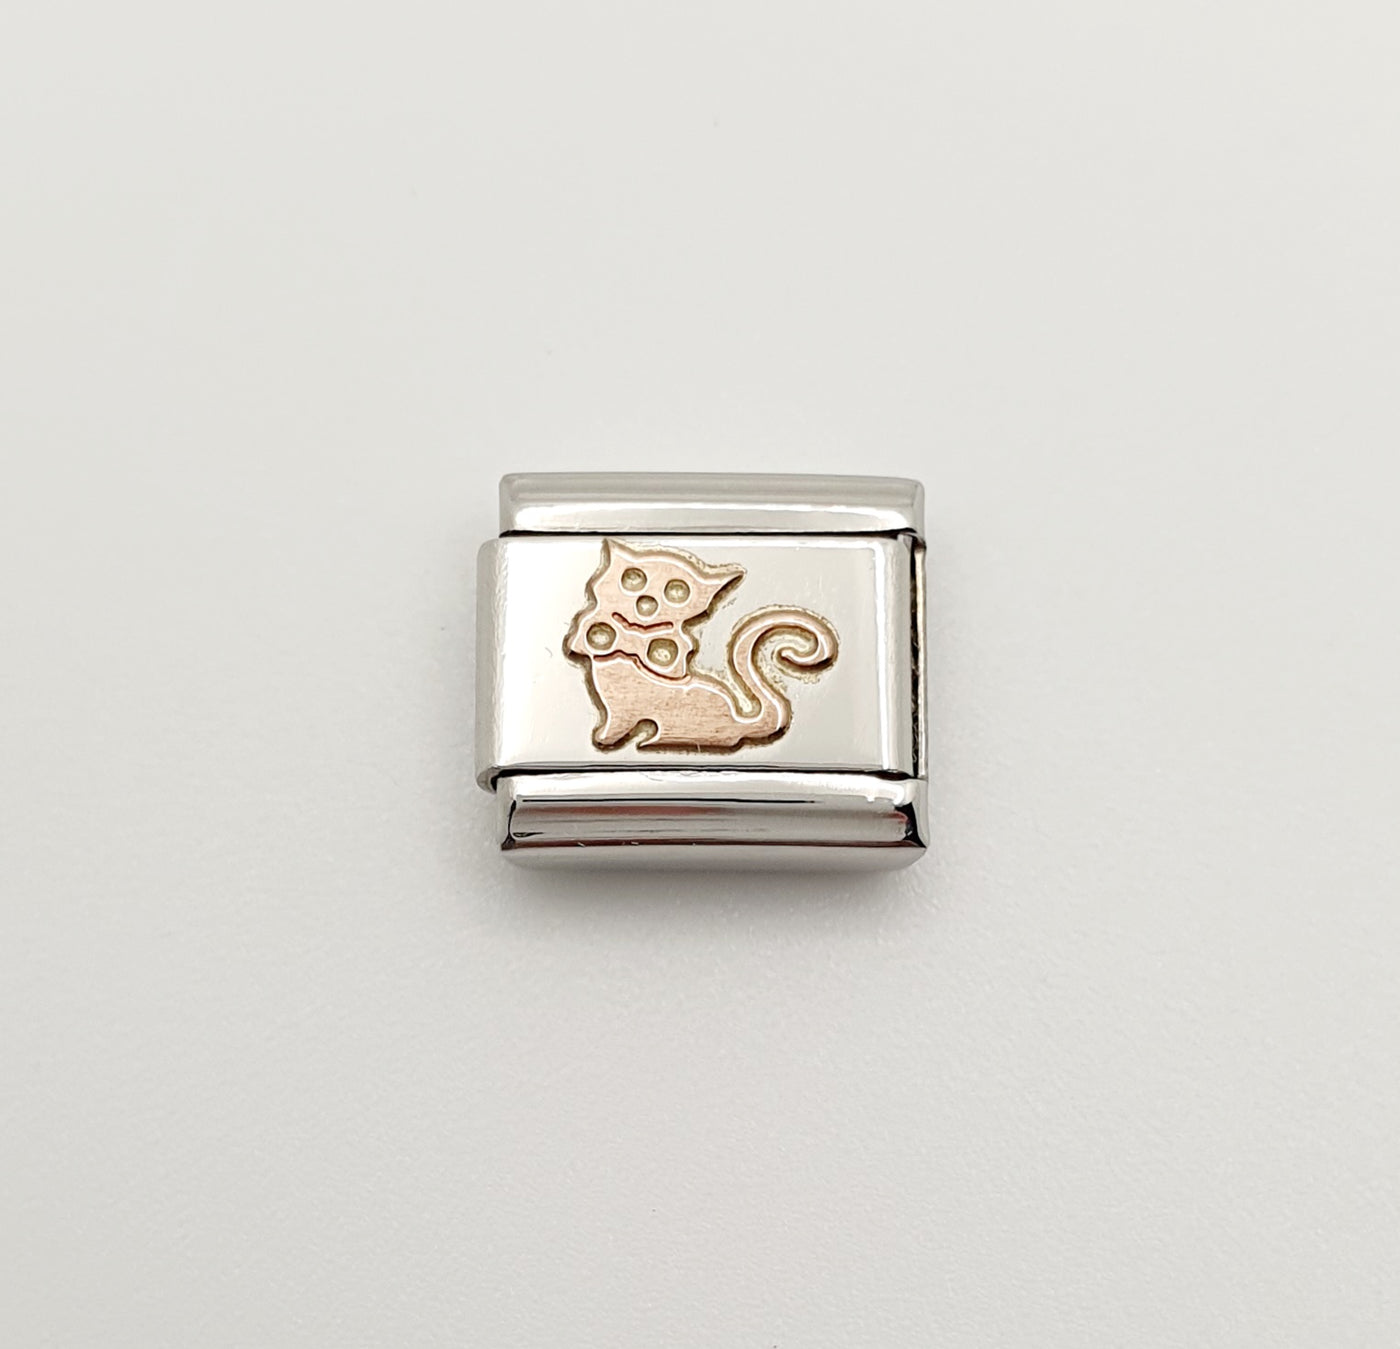 Nomination Charm Link "Cat" Stainless Steel with 9k Rose Gold, 430104 11